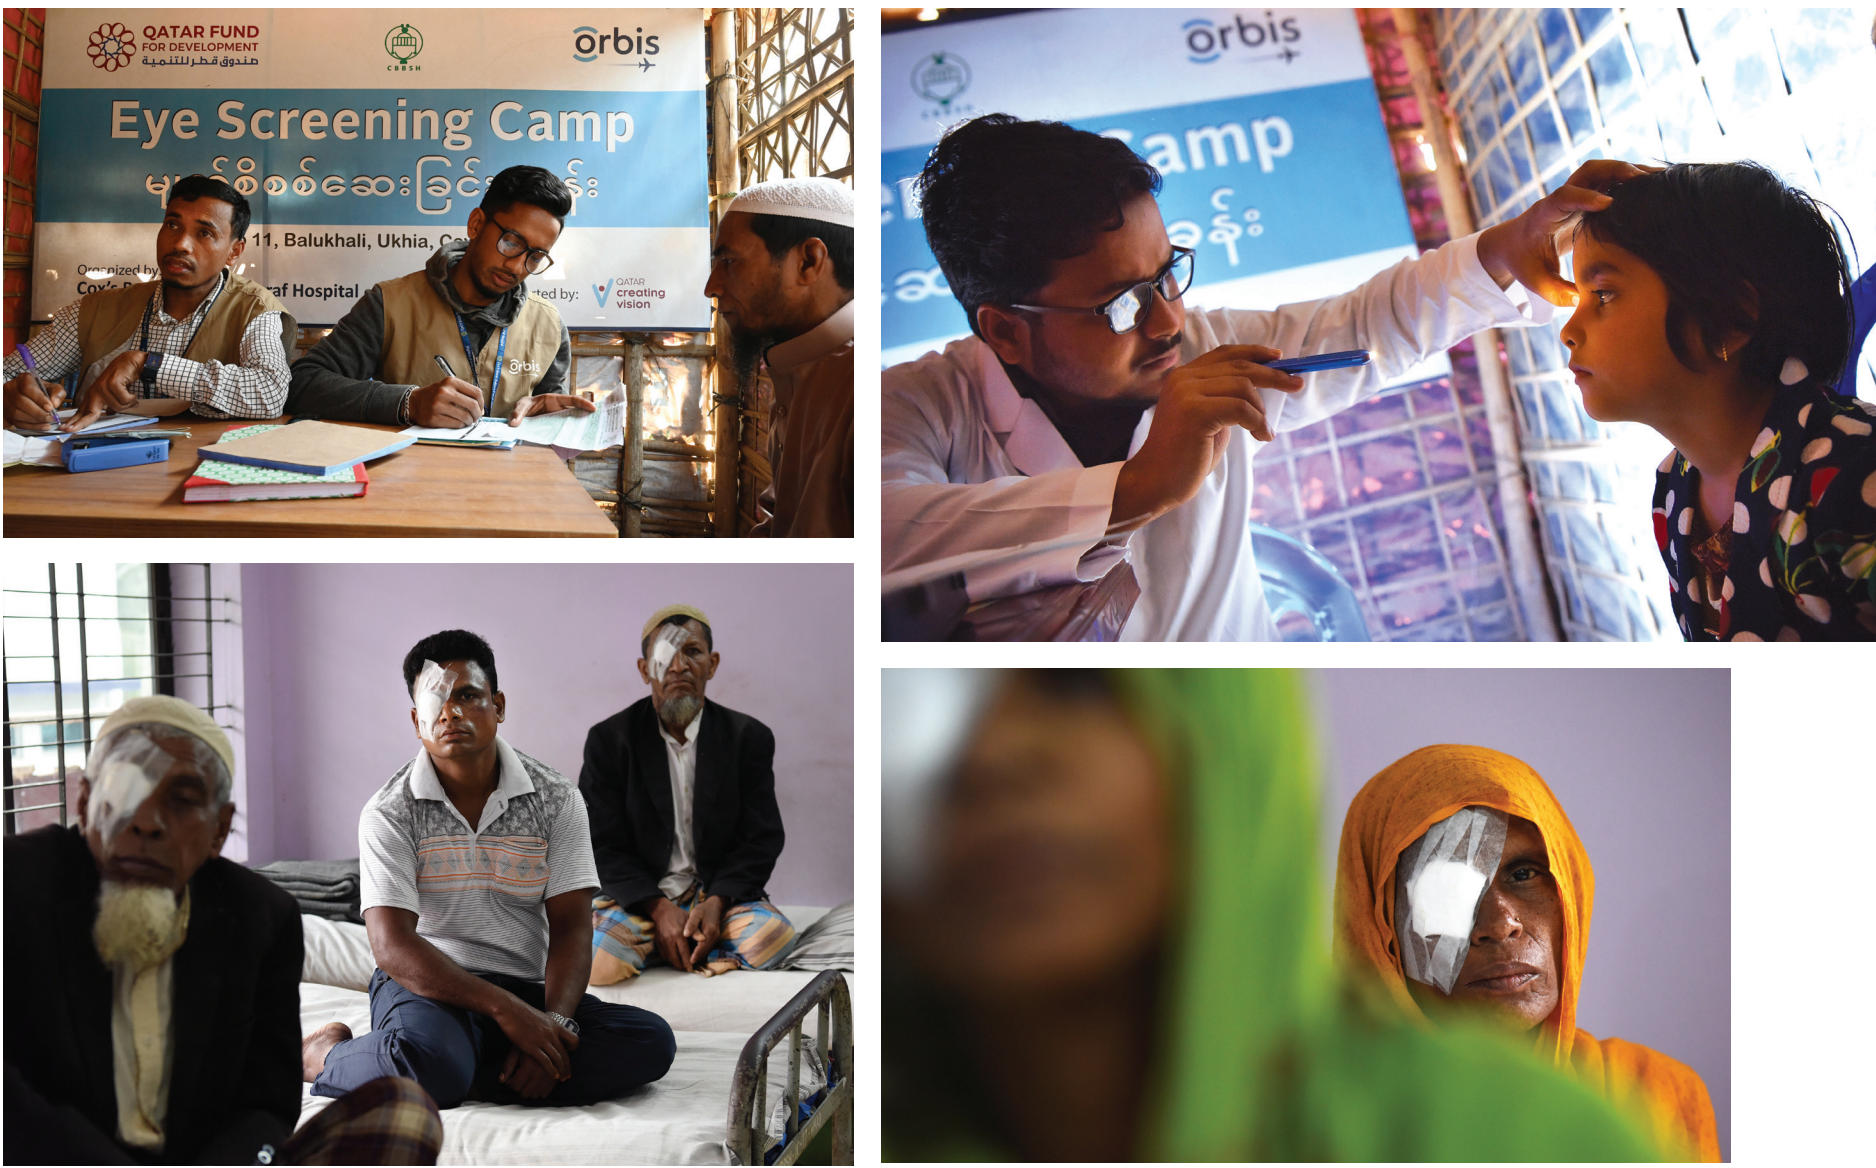 At top, physicians register and check patients in need of ophthalmic care. Center above, patients after treatment. Above, children enjoy the visits from the physicians, who bring treats. (All images courtesy of Geoff Oliver Bugbee/Orbis International)